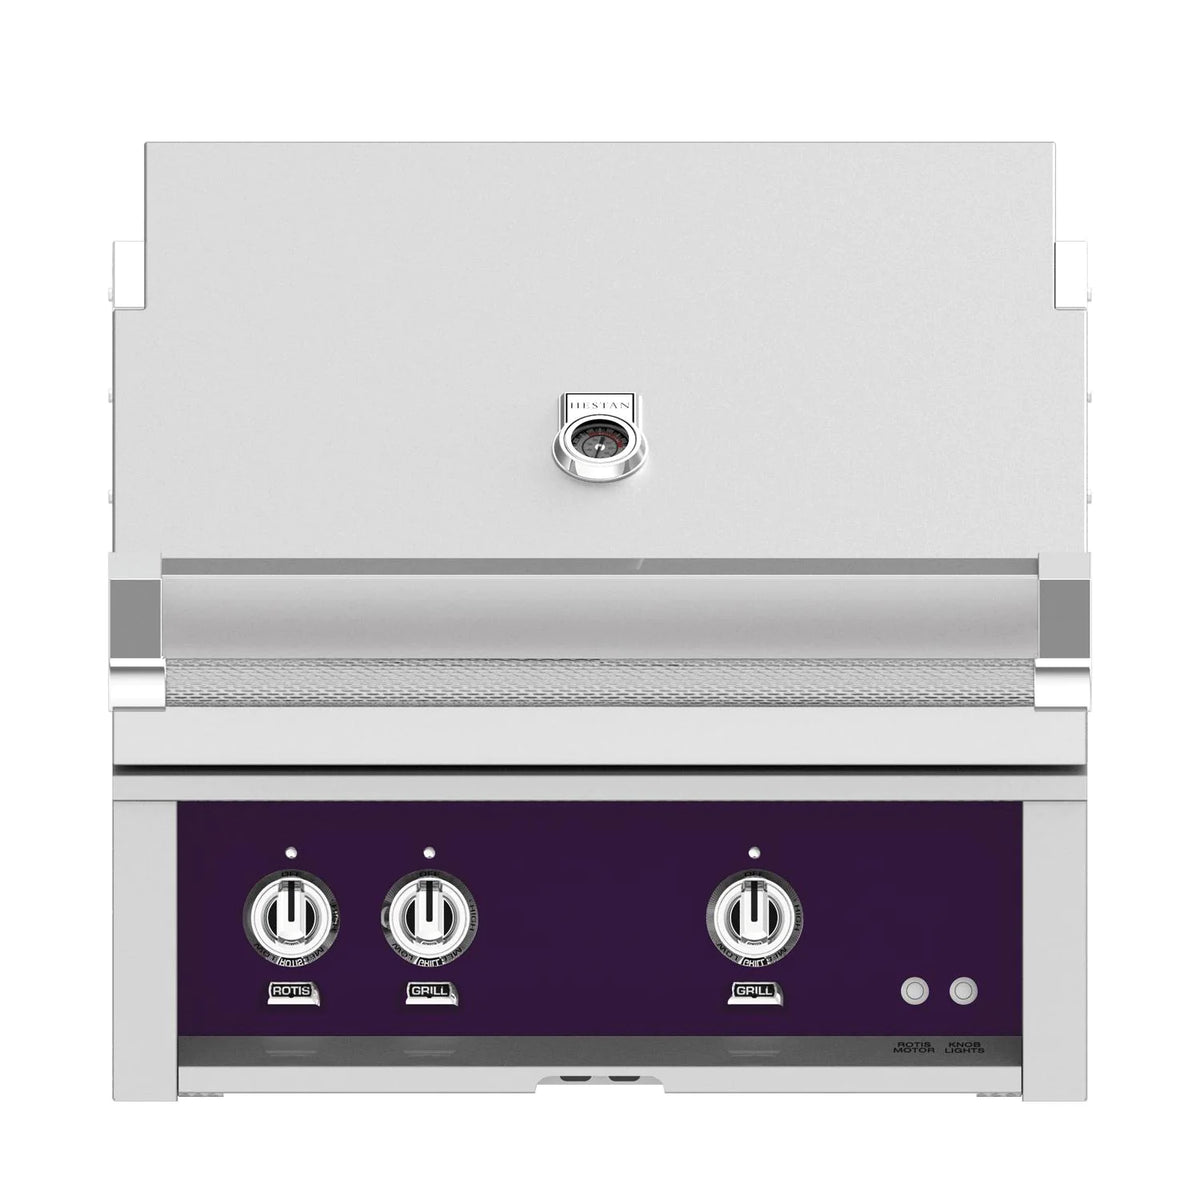 Hestan 30-Inch Built-In Gas Grill With Sear Burner And Rotisserie - Warming Rack Stowed Away in Purple Color